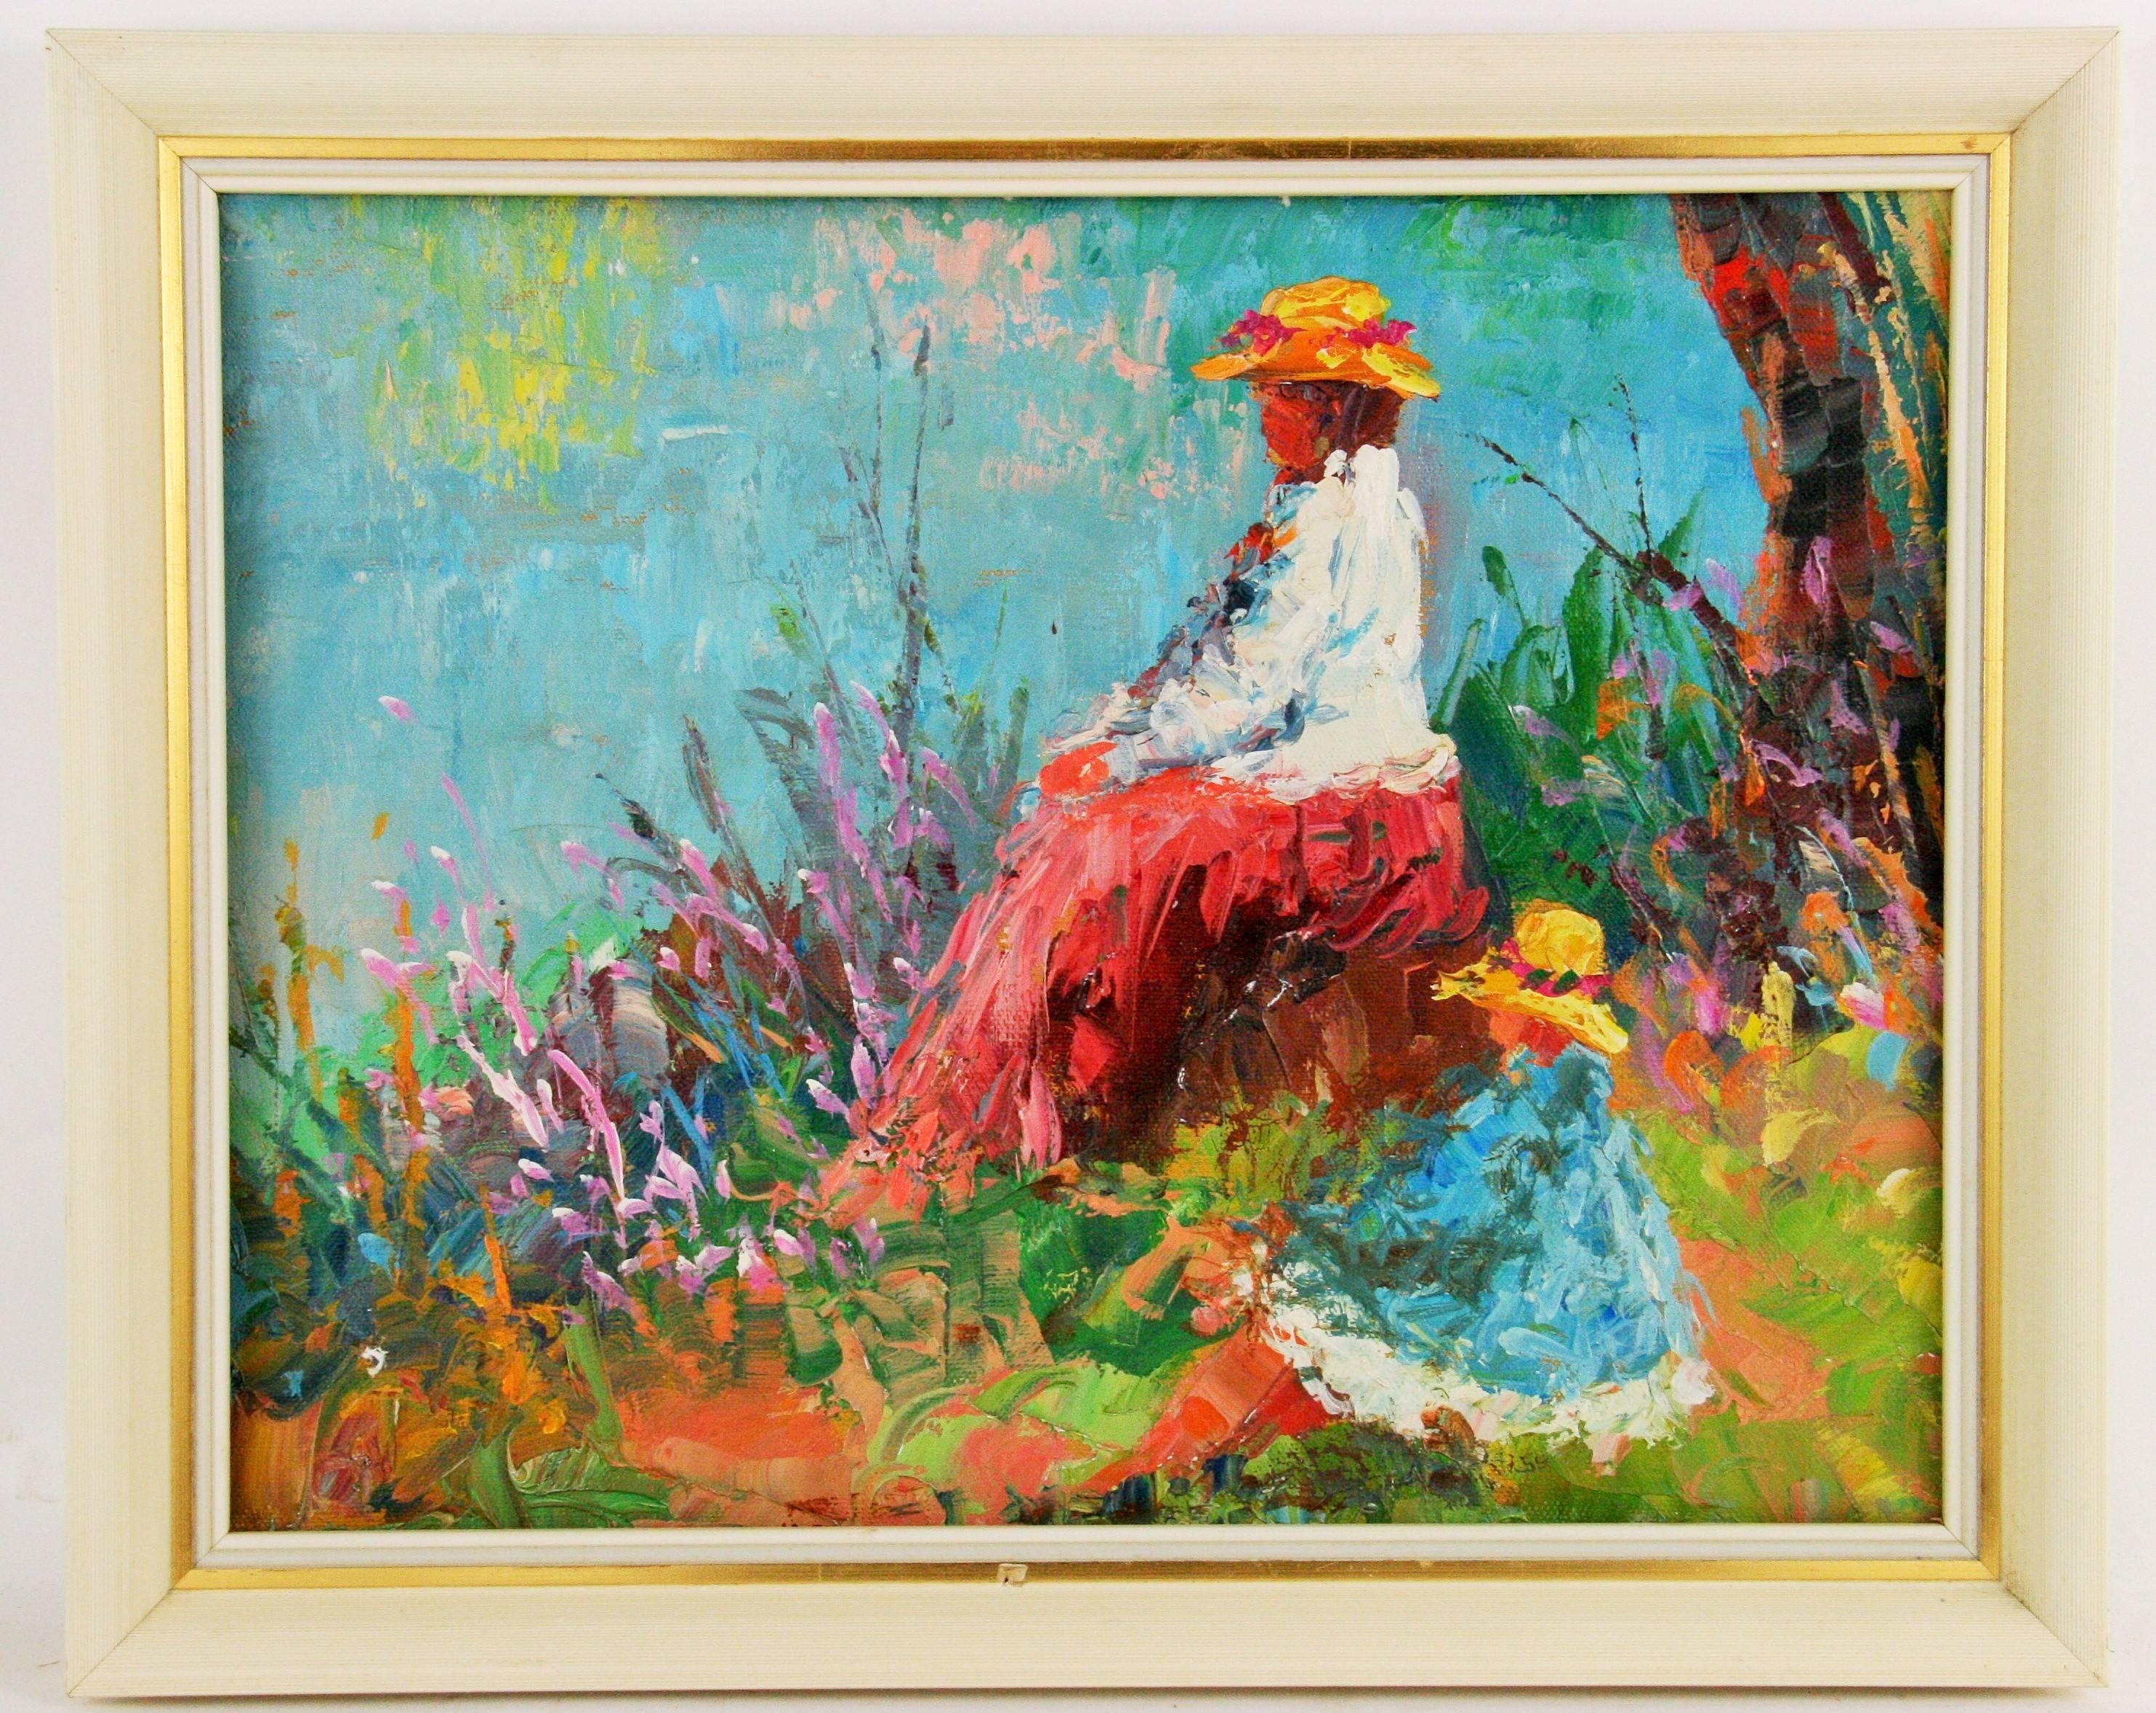 #5-2858 A mother and child,figurative impressionistic style palette oil on canvas applied on board.Displayed in a wood frame.Artist unknown.Image size 10.5 H x 13.5 W